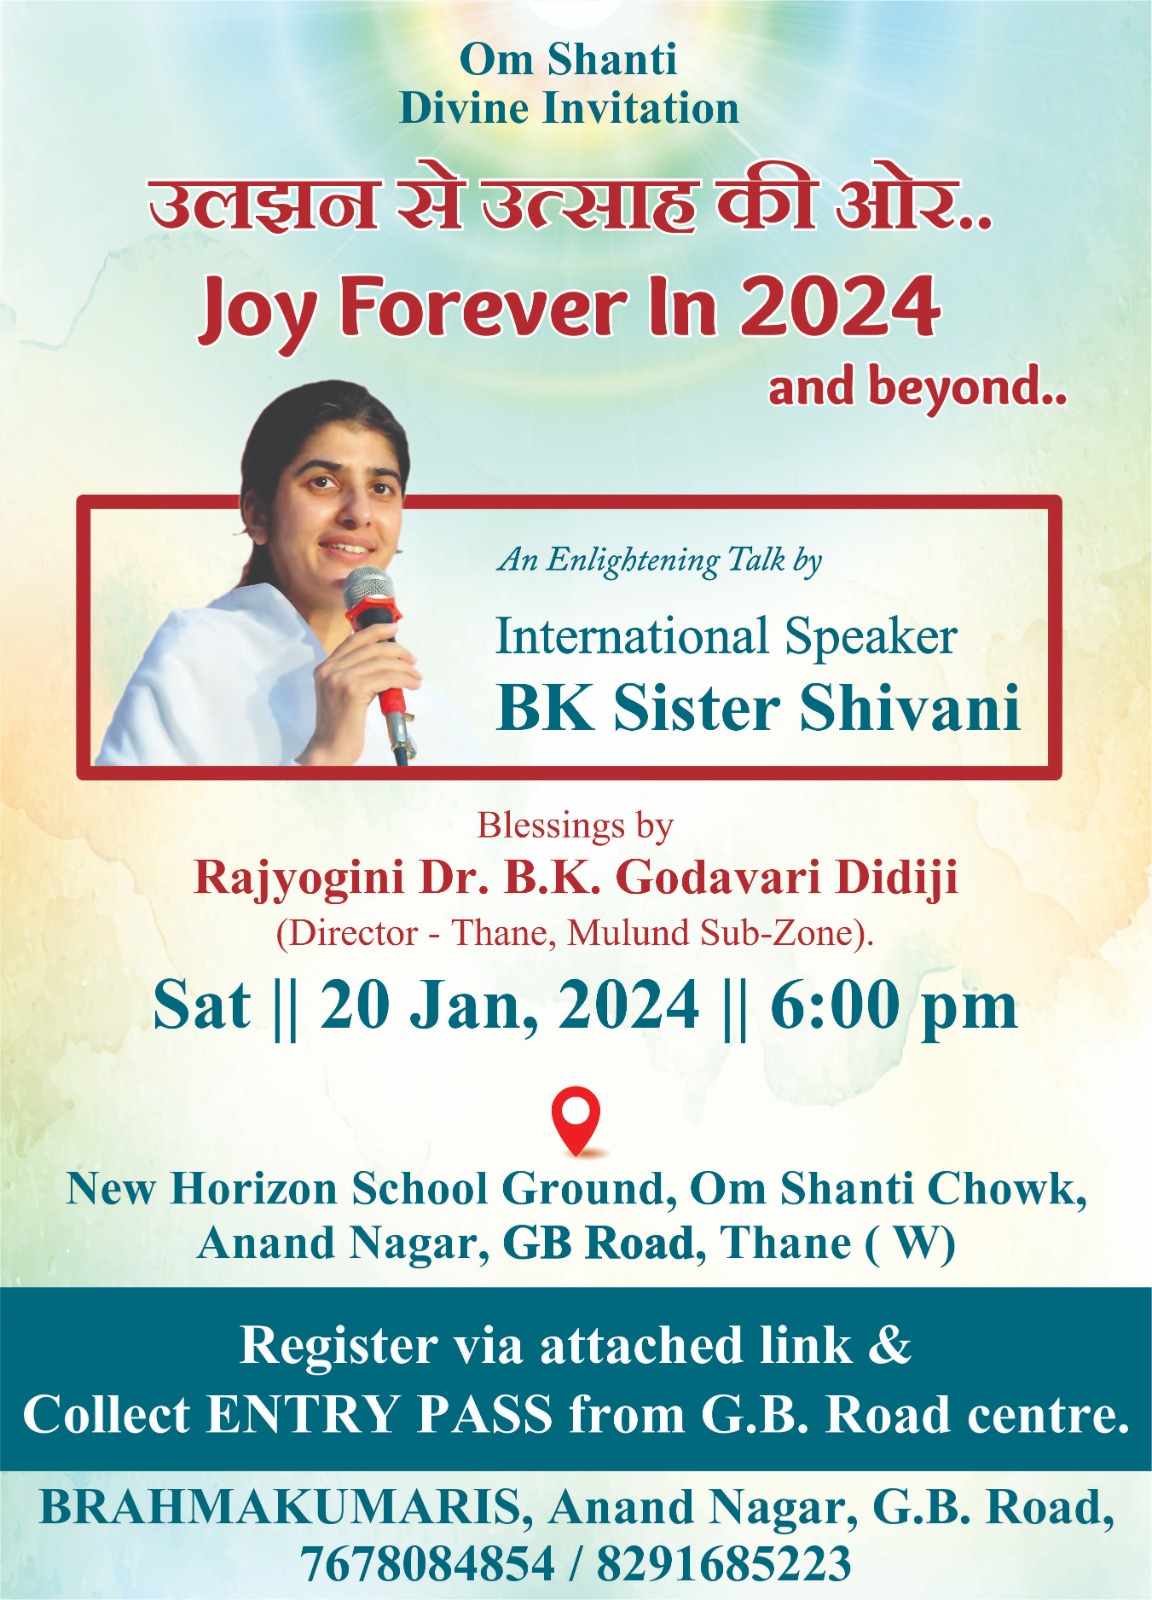 Joy forever in 2024 and beyond